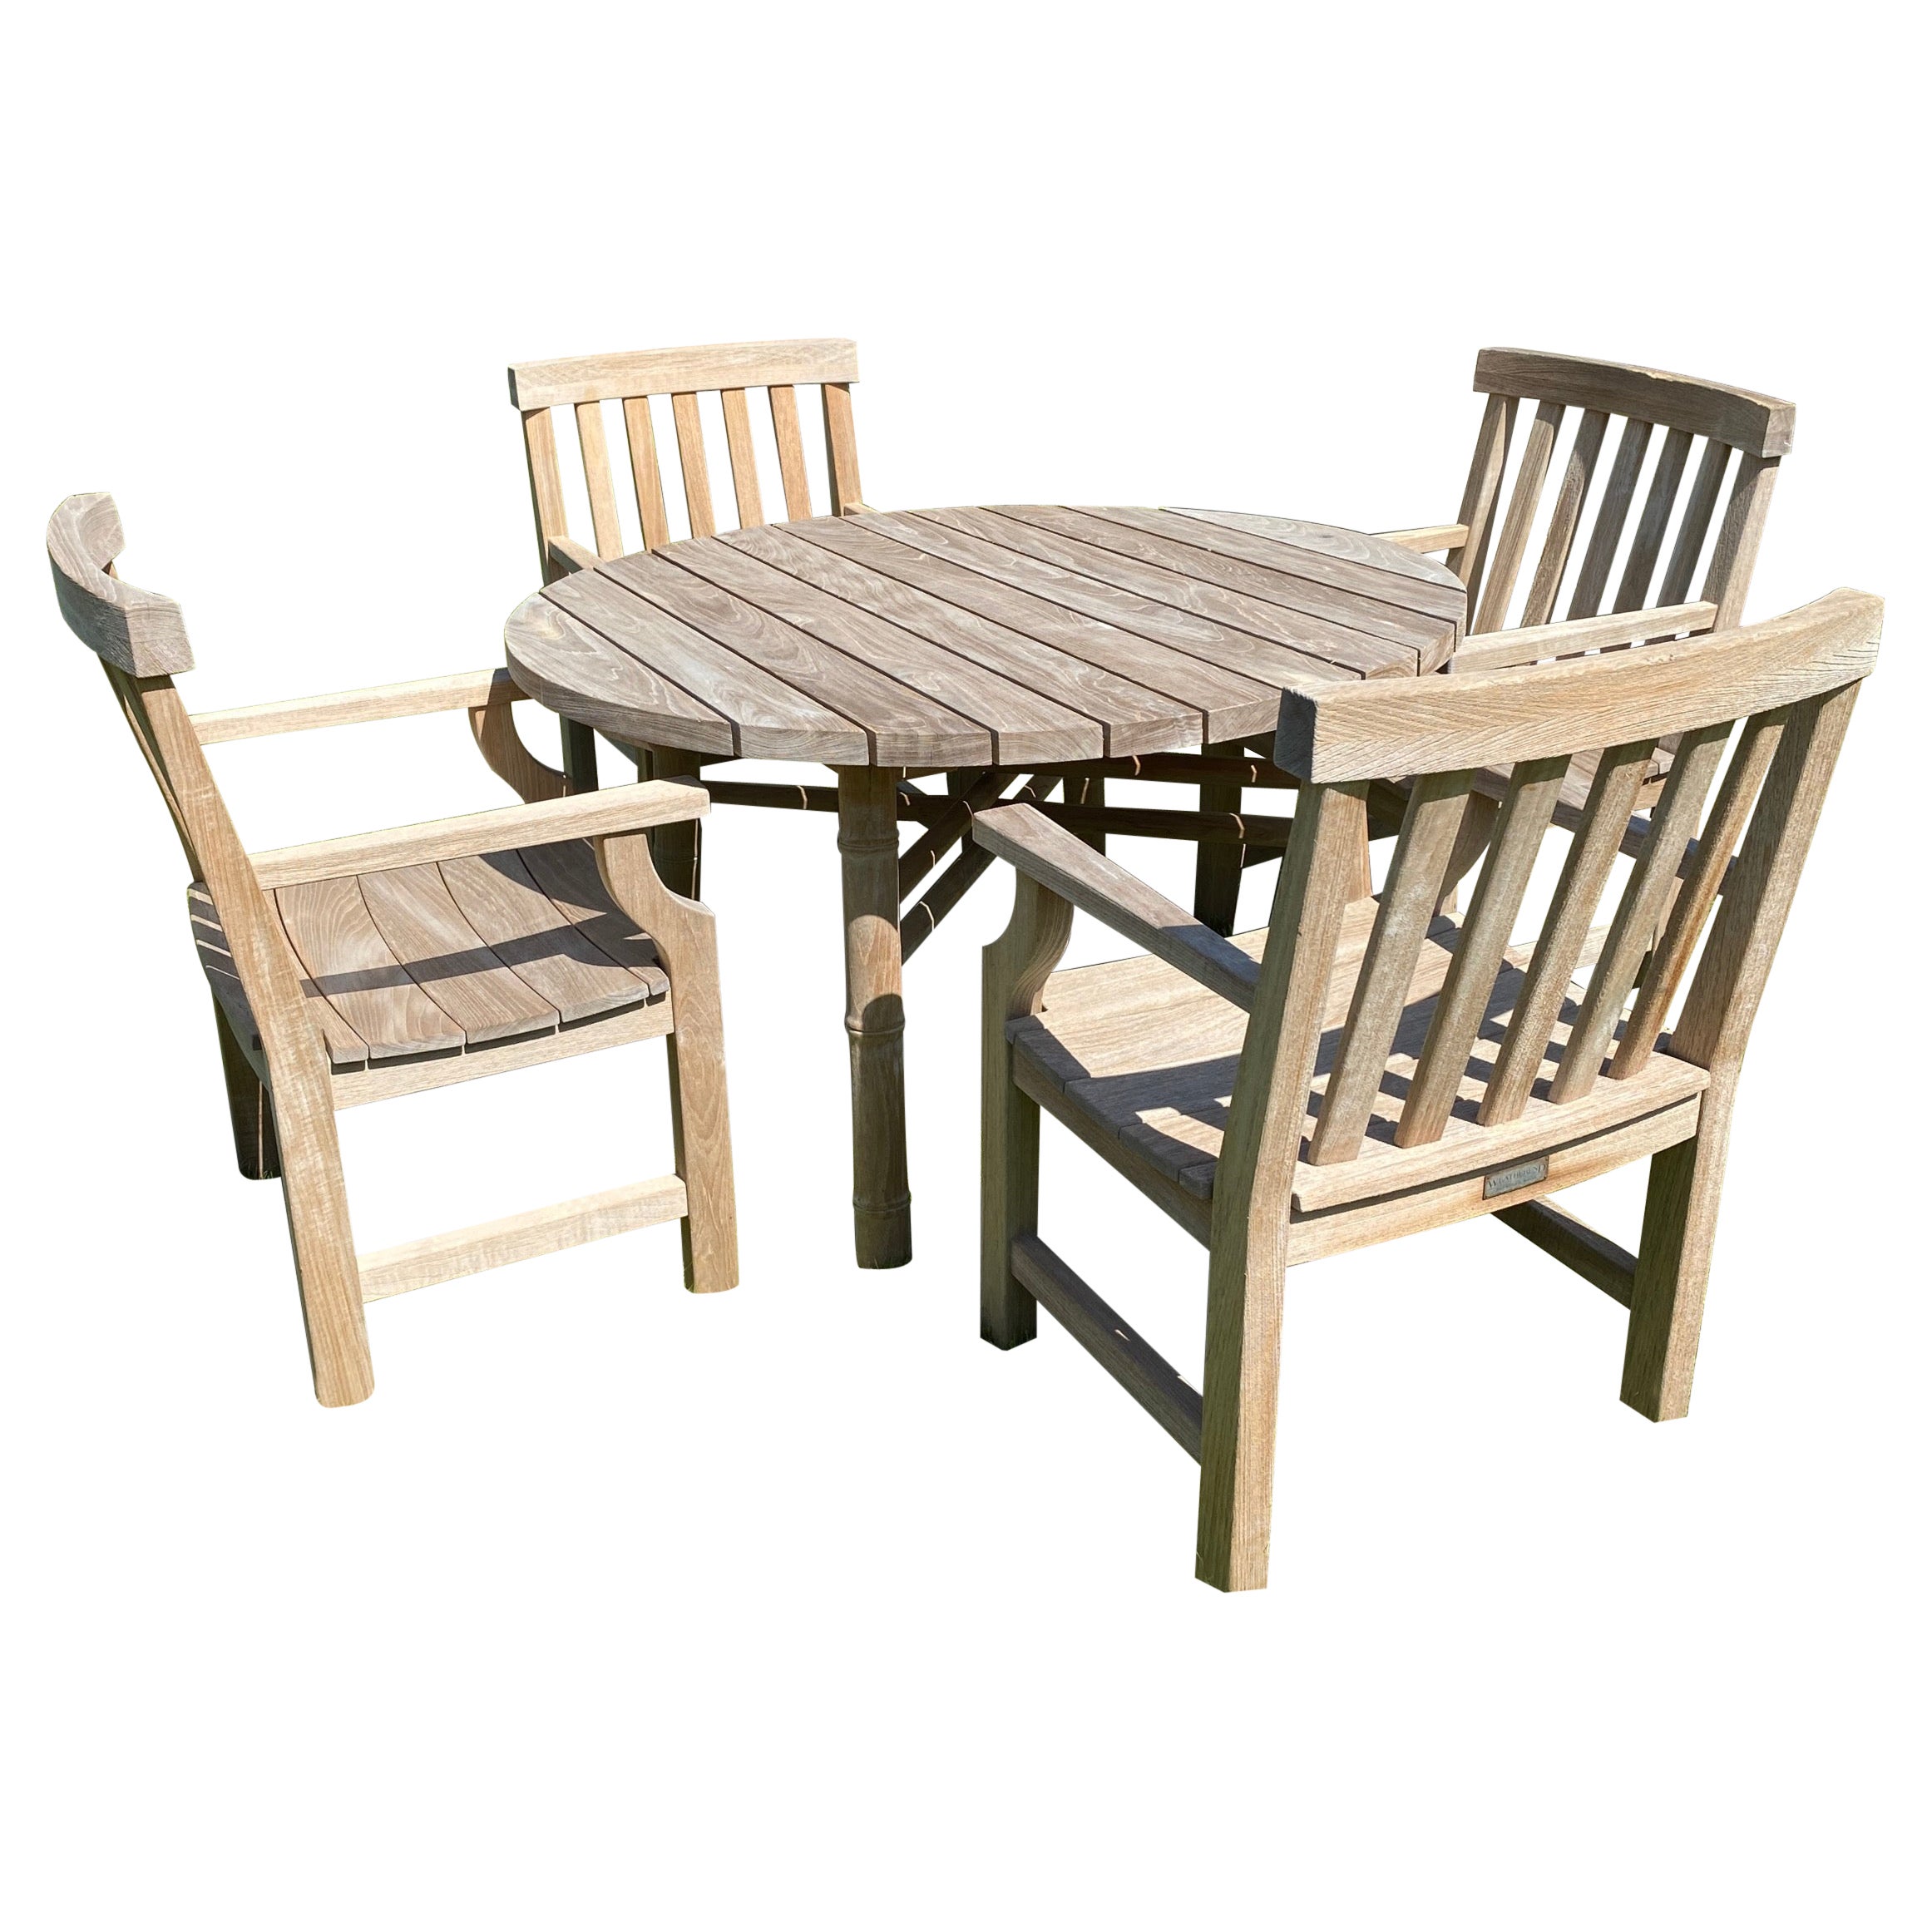 Teak Wood Garden Dining Table and Chair Ensemble